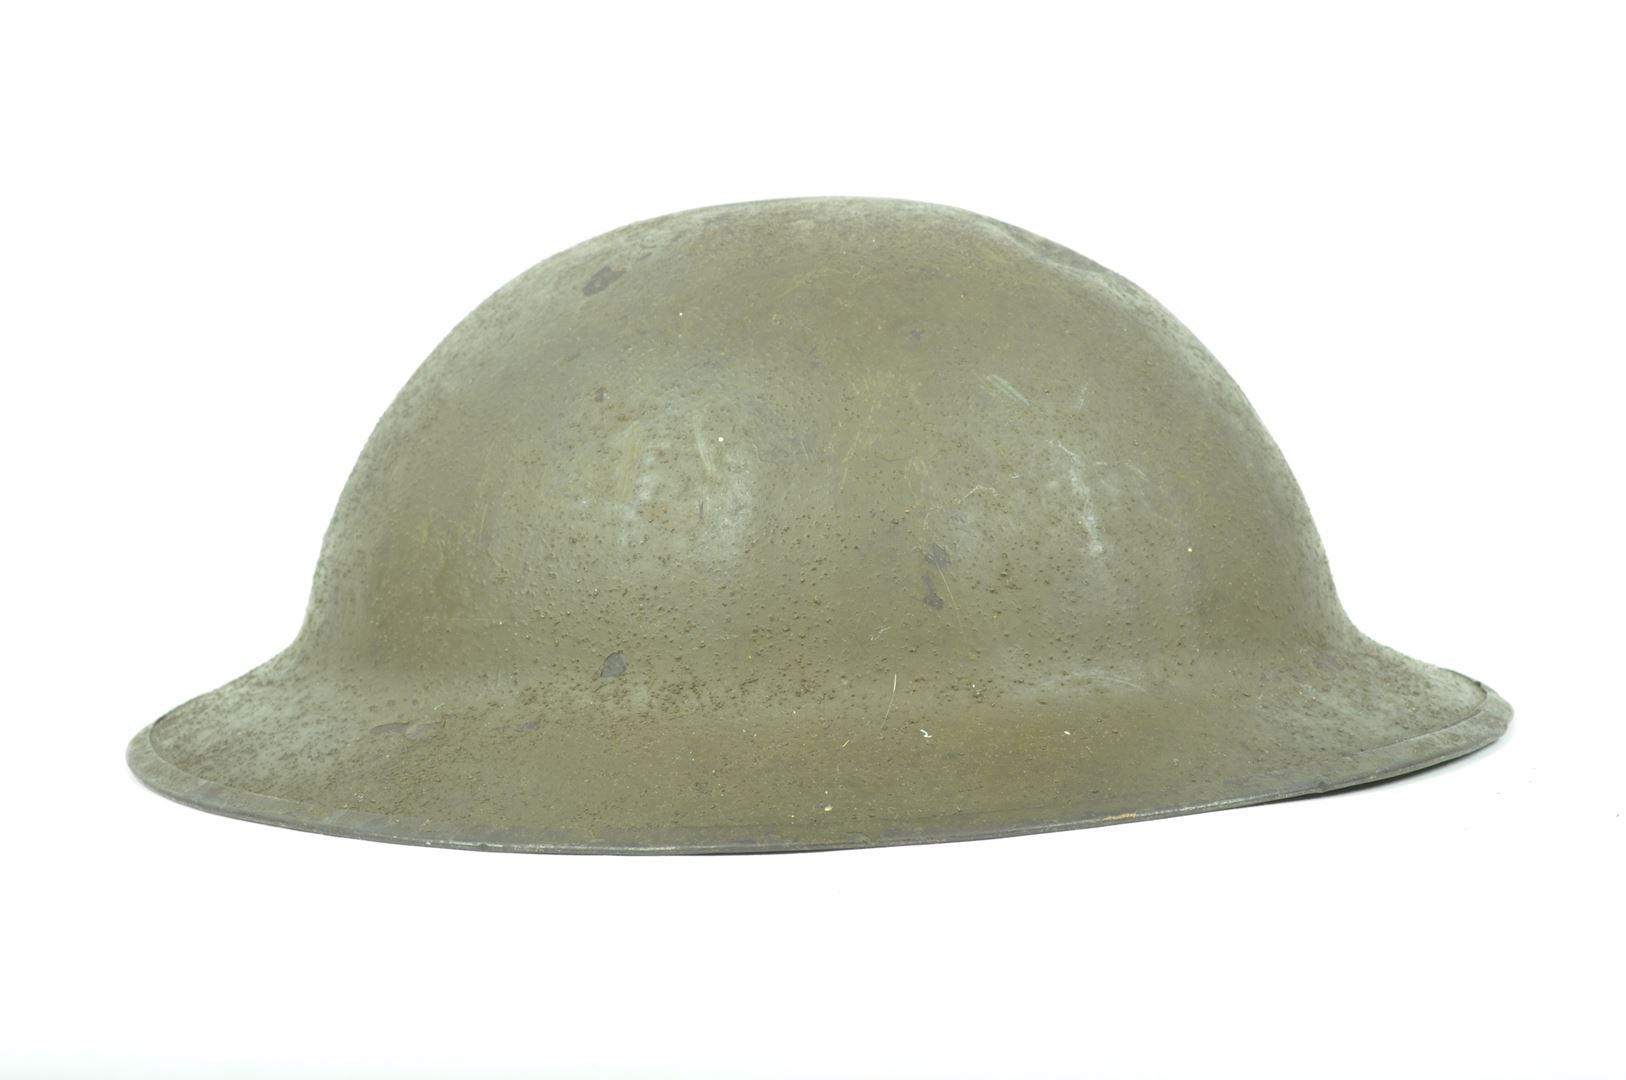 Casque US 17 / 1st infantry division " BIG RED ONE"